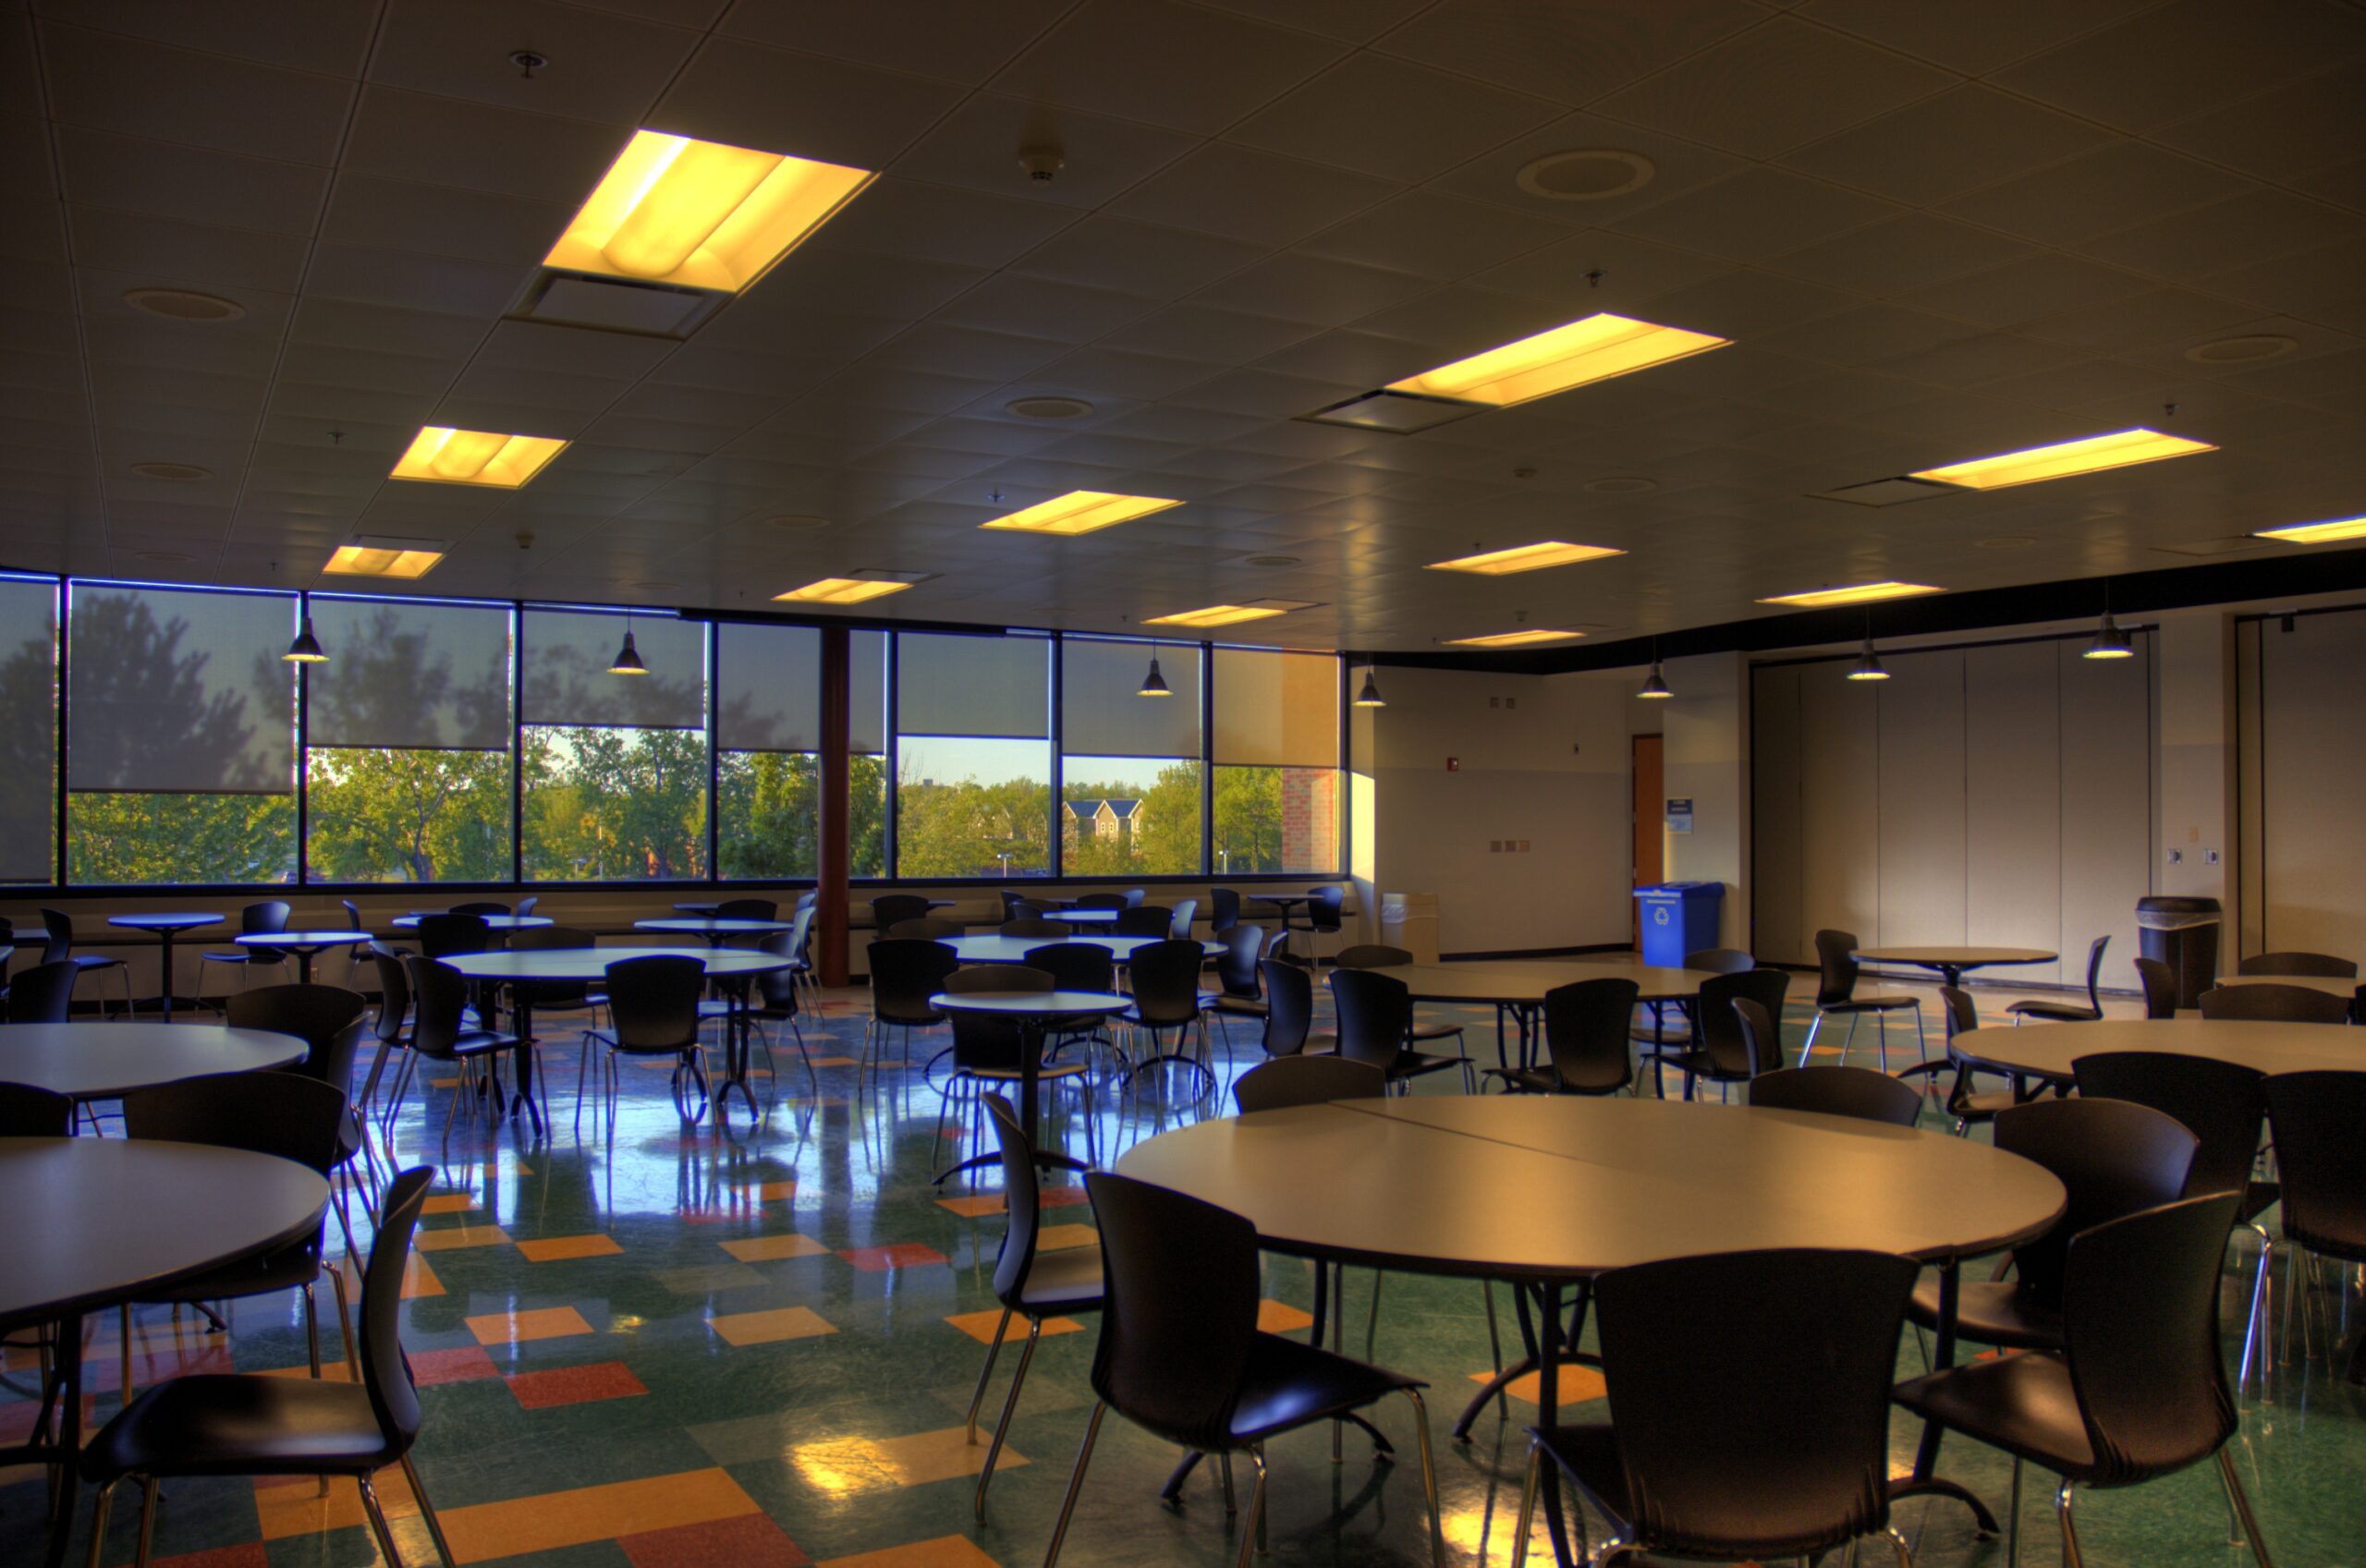 Monroe Community College Cafeteria, all seats at round tables empty, yellow overhead lighting